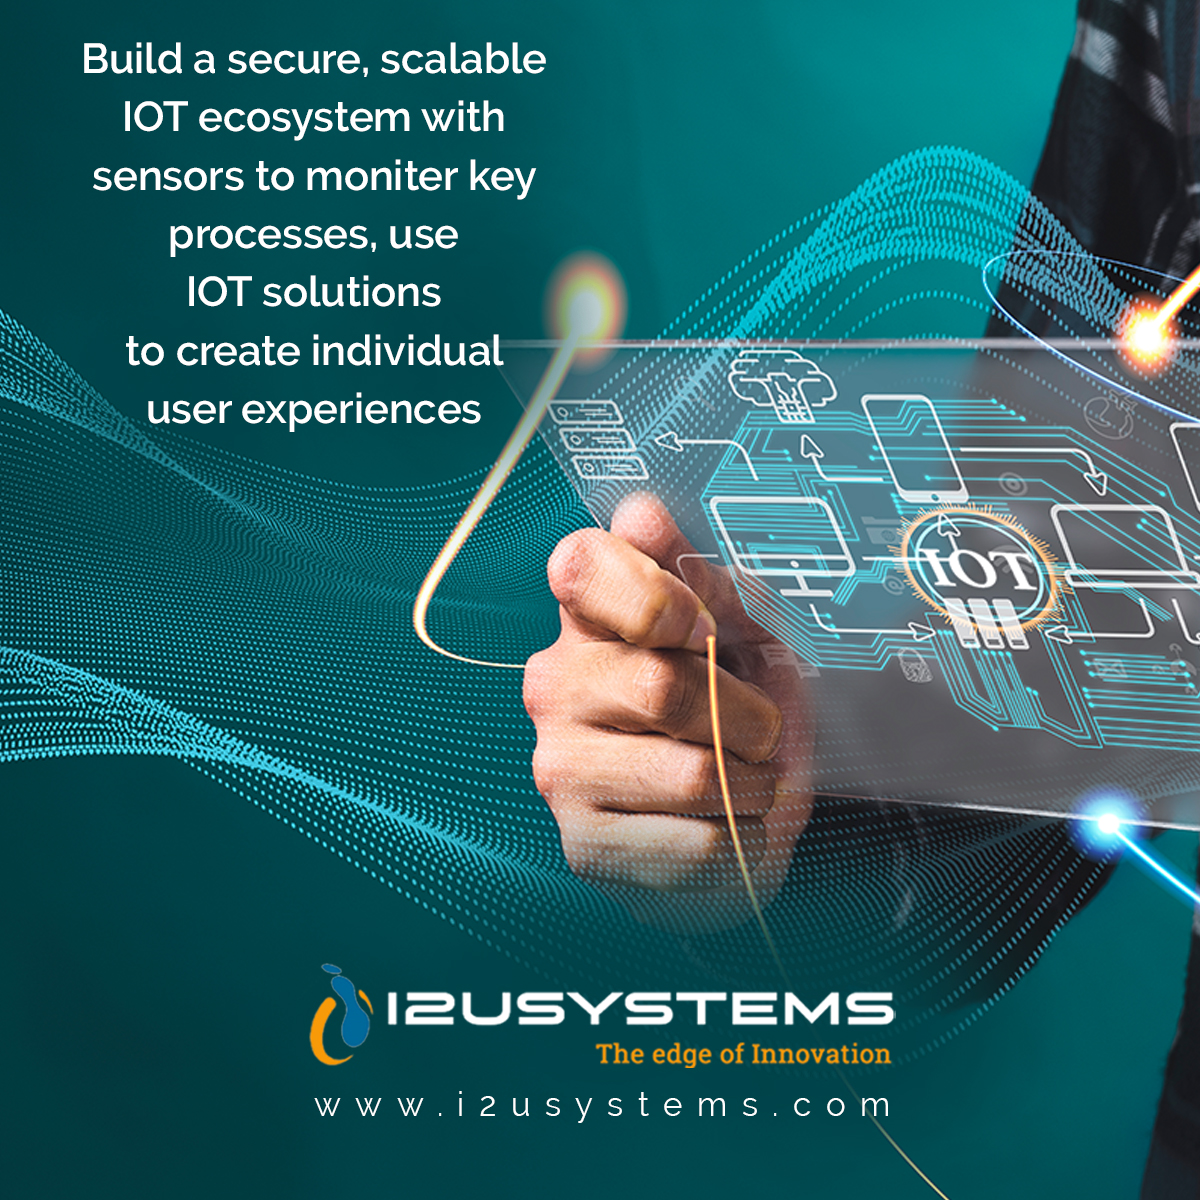 Internet of Things   Build a secure, scalable IOT ecosystem with sensors to monitor key processes, use IOT solutions to create individual user experiences.  

#i2usystems #c2crequirements #directclient  #hardwork #internetofthings #iot #ecosystem #iotsolutions #user #experience